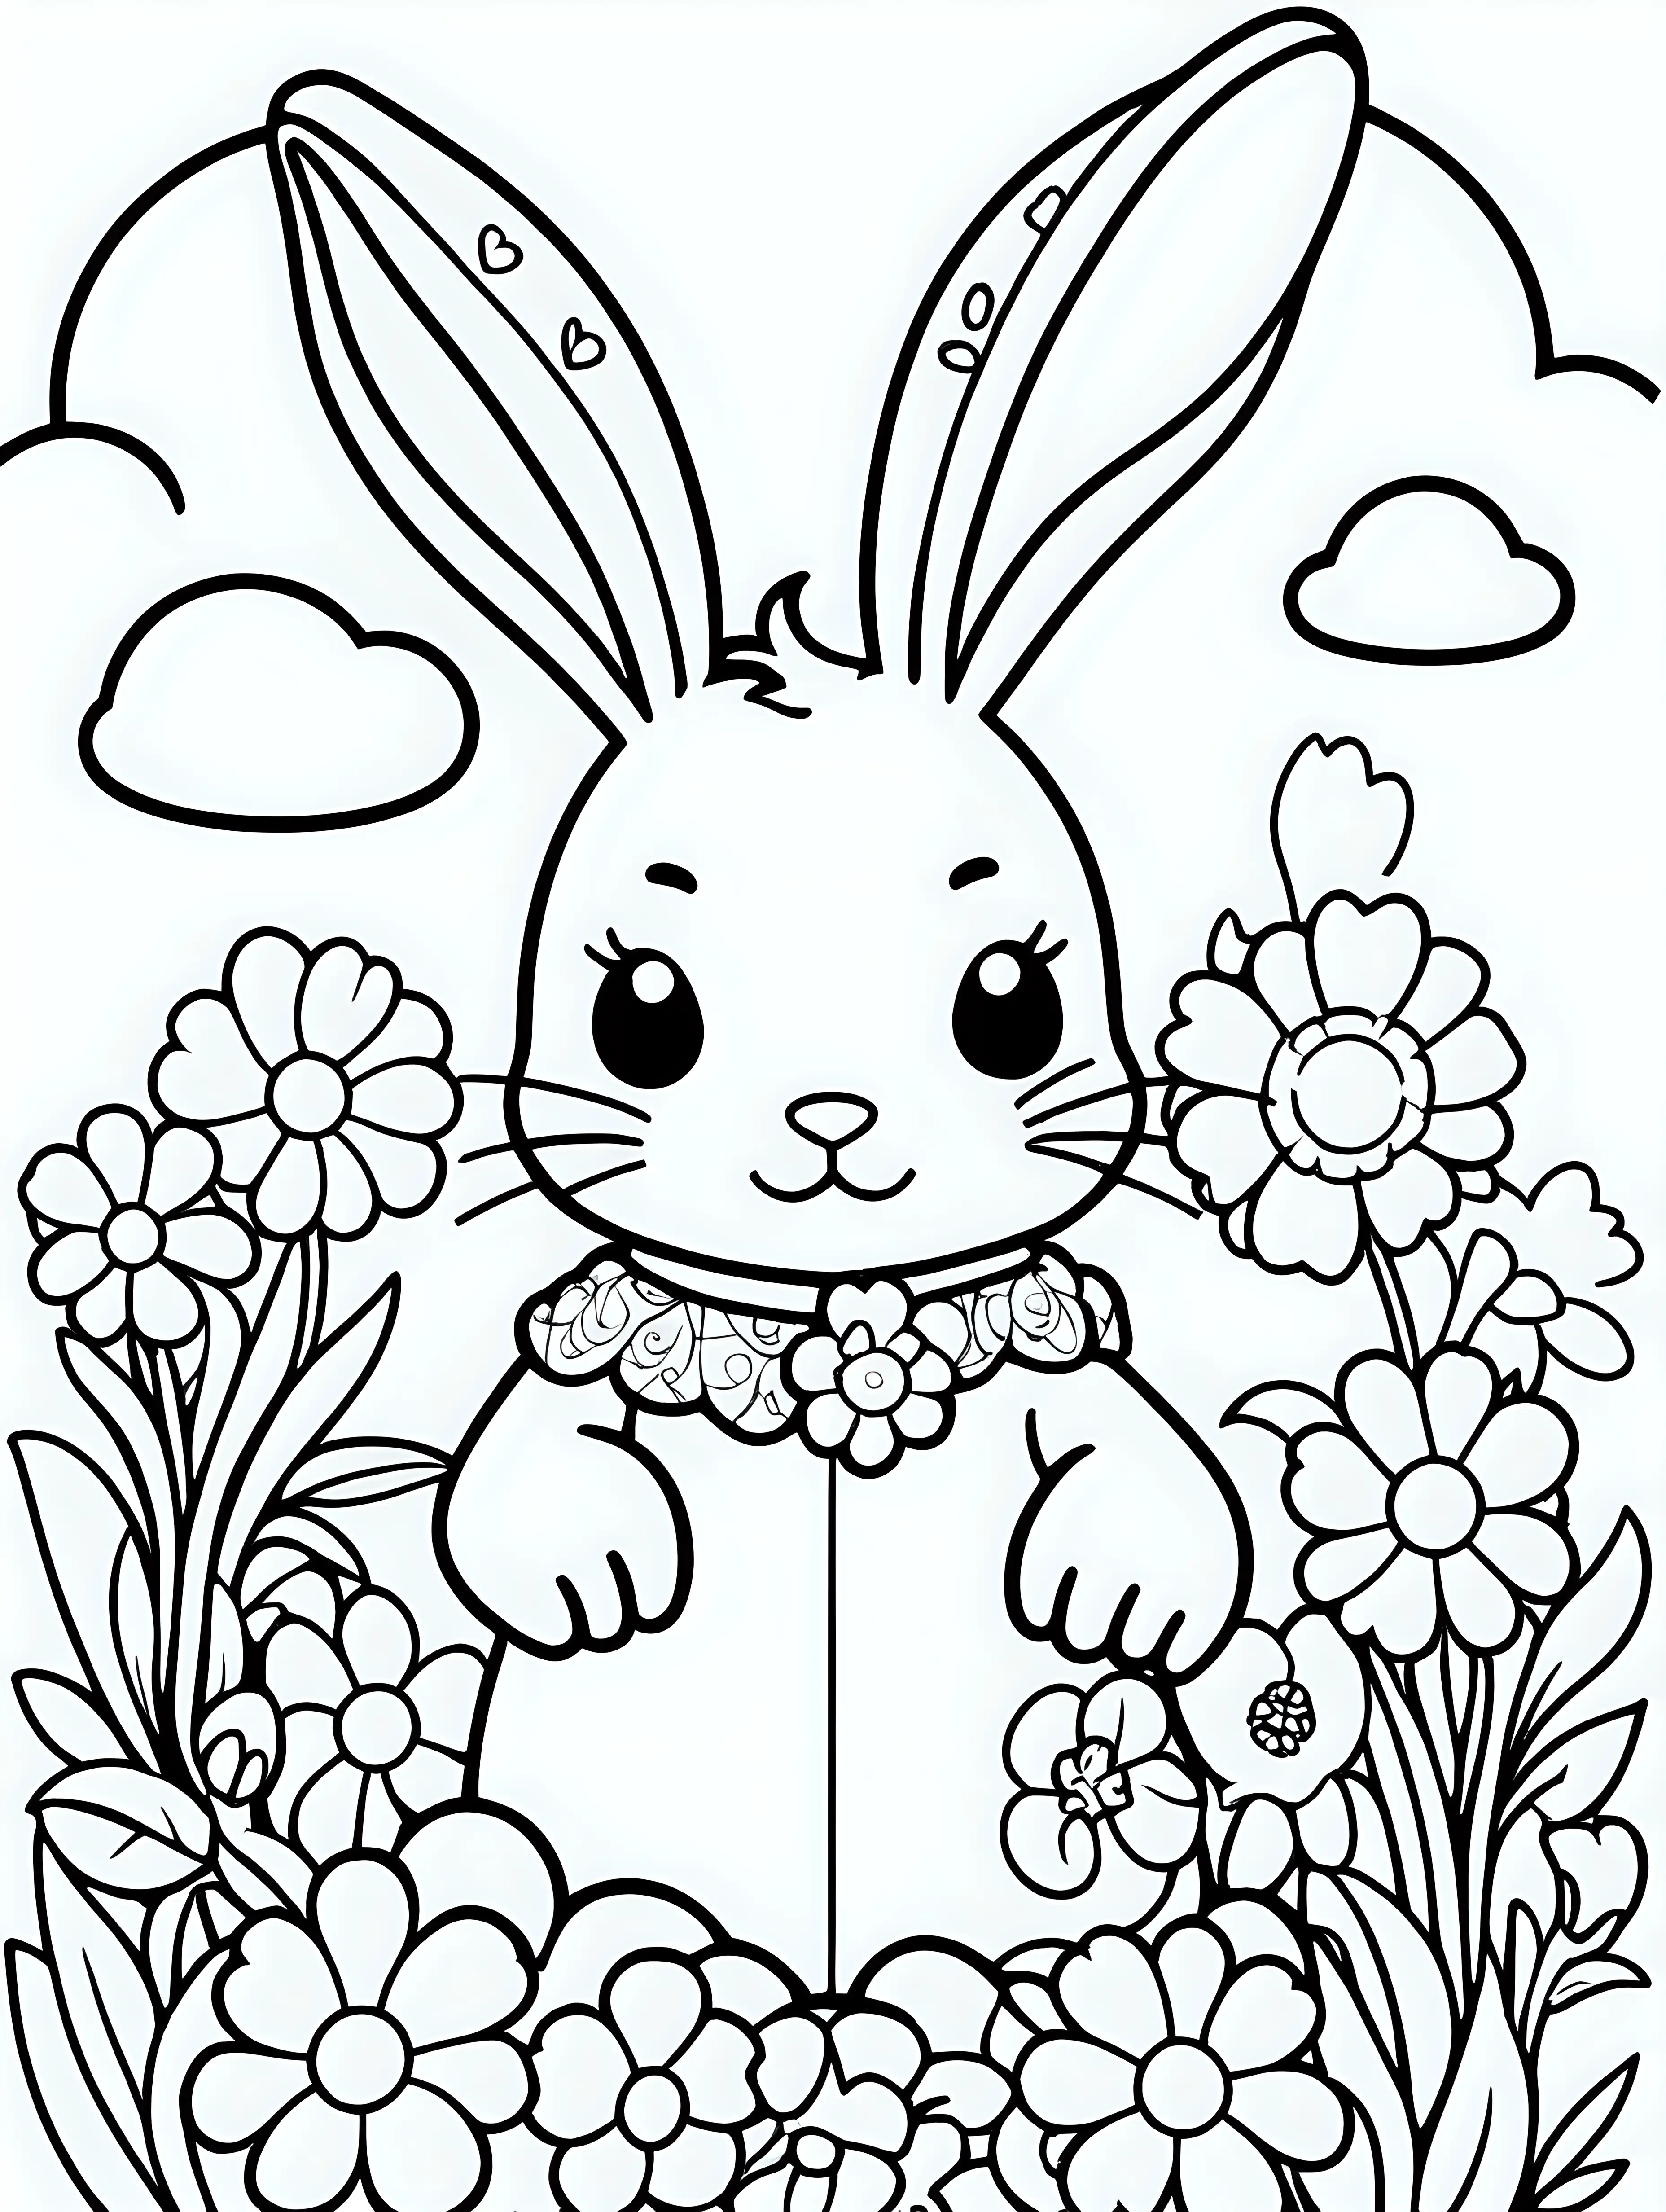 Coloring page for kids with a cute kawaii bunny with flowers around and clouds in the sky above him, blacklines and white background only black and white